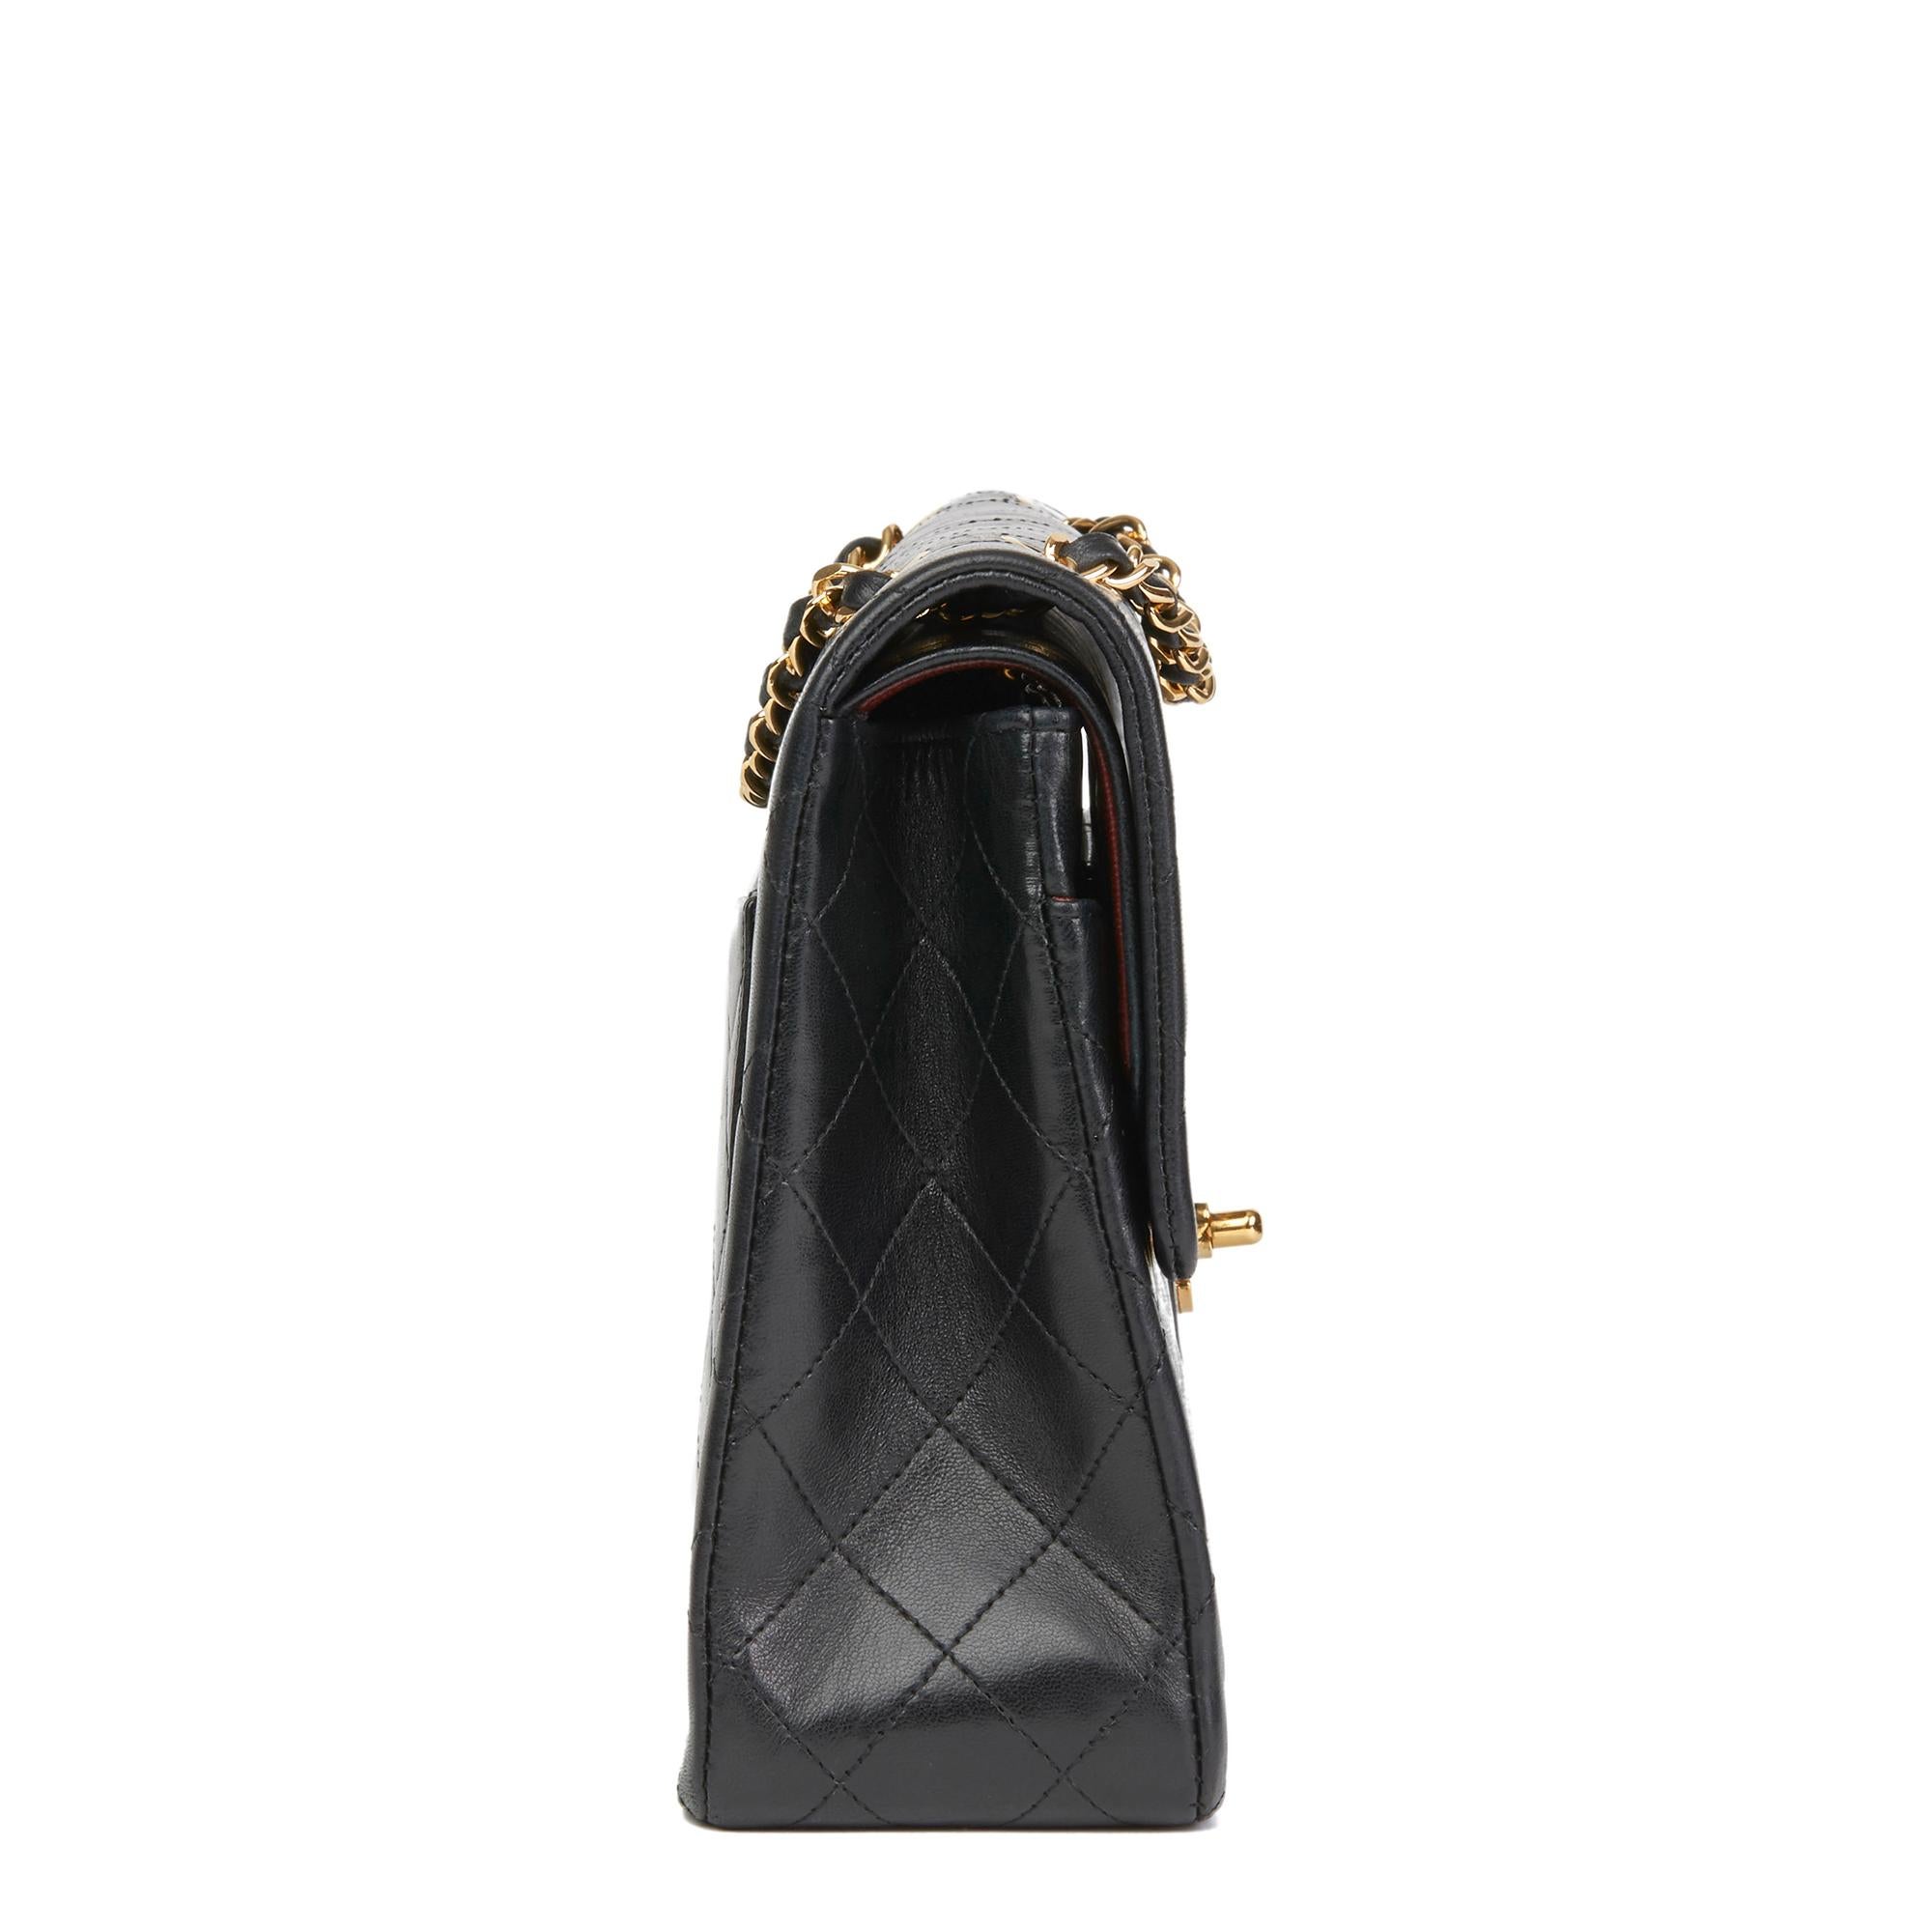 CHANEL
Black Quilted Lambskin Vintage Medium Tall Classic Double Flap Bag

Reference: HB2712
Serial Number: 1178622
Age (Circa): 1990
Accompanied By: Chanel Dust Bag
Authenticity Details: Serial Sticker (Made in France)
Gender: Ladies
Type: